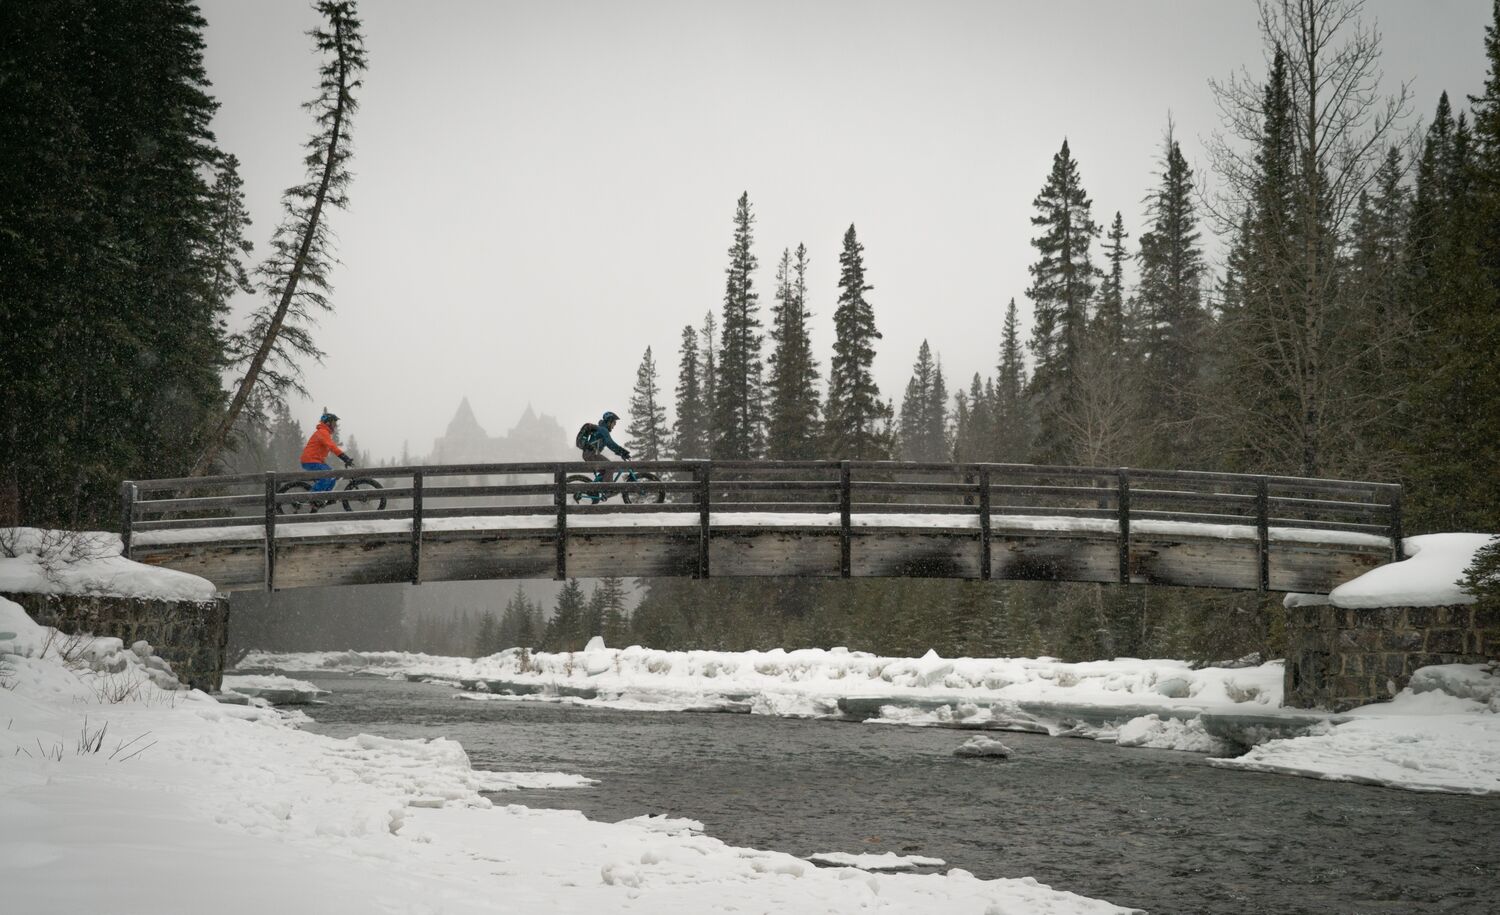 Two people bike over a bridge on the Spray River Trail in Banff National Park in winter.